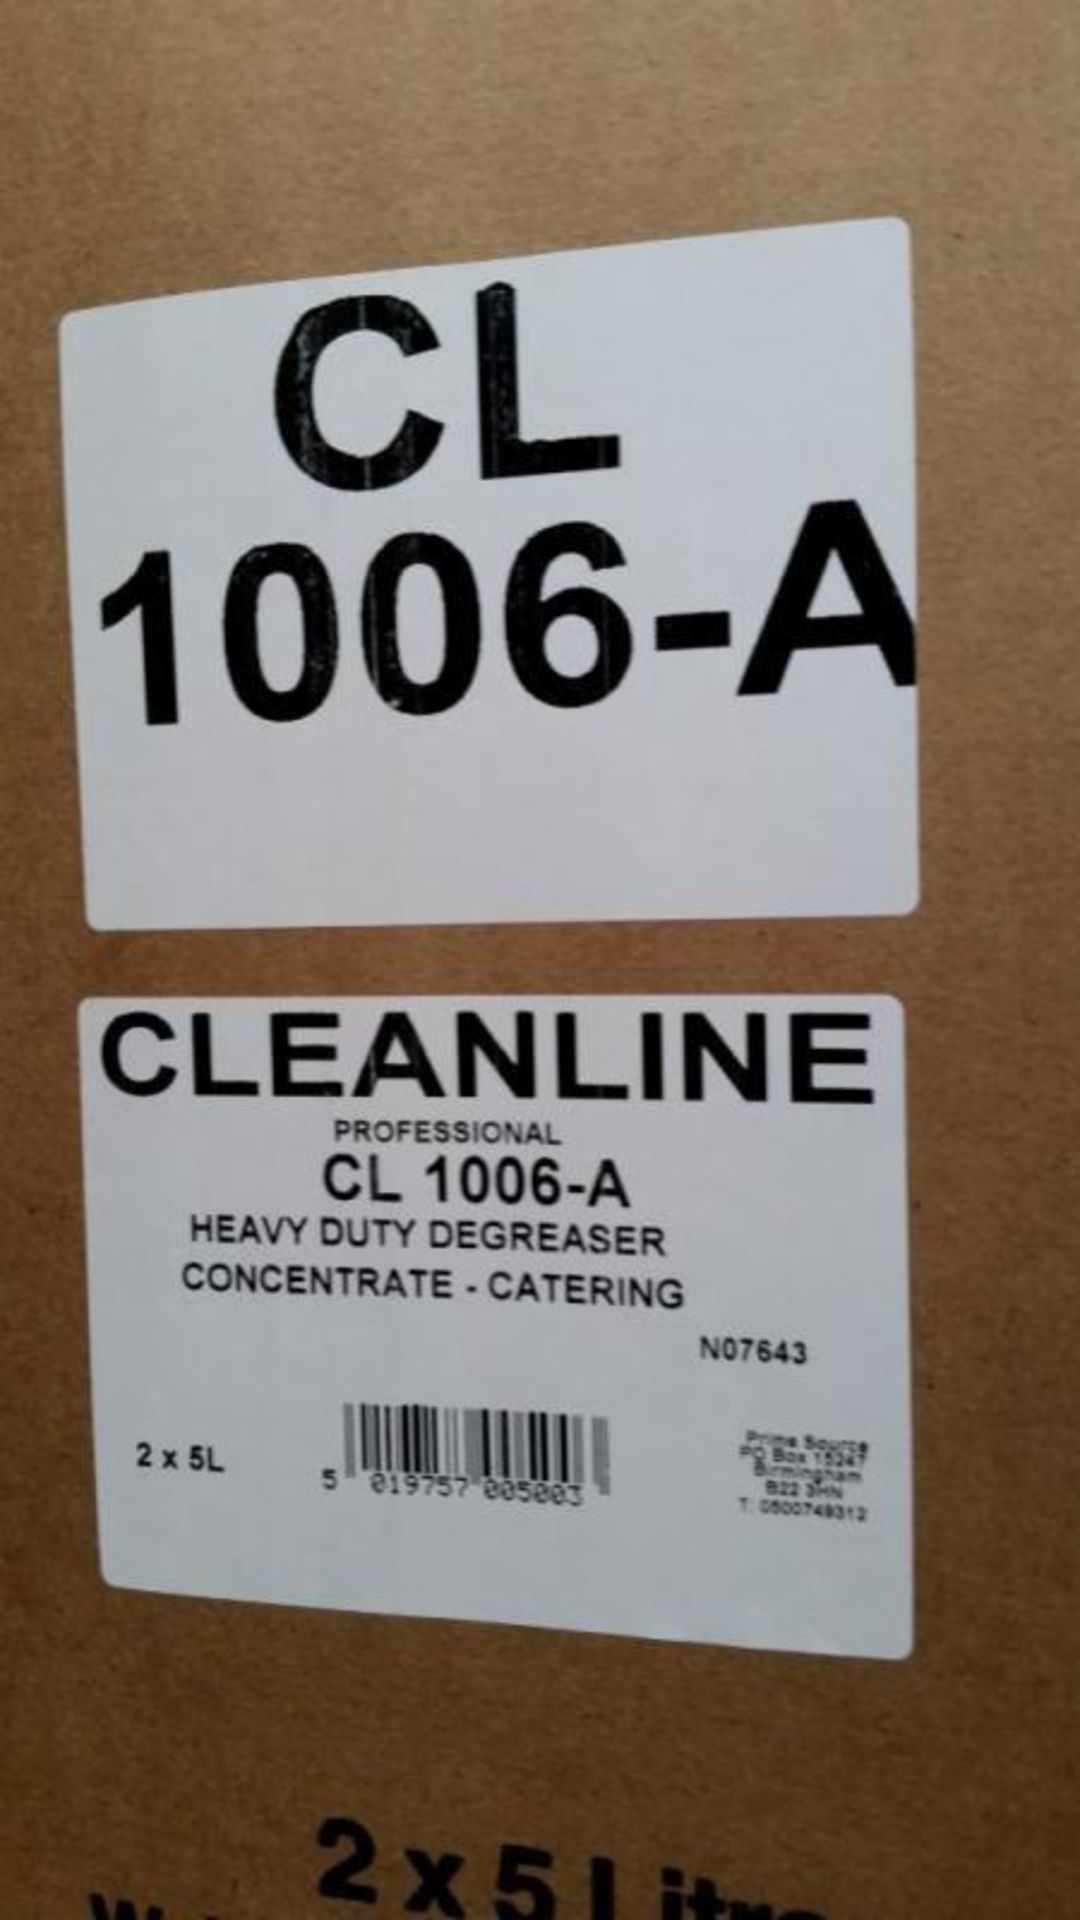 2 x Clean Line Professional 5 Litre Heavy Duty Degreaser Concentrate - Alkaline Cleaner & Degreaser - Image 2 of 5